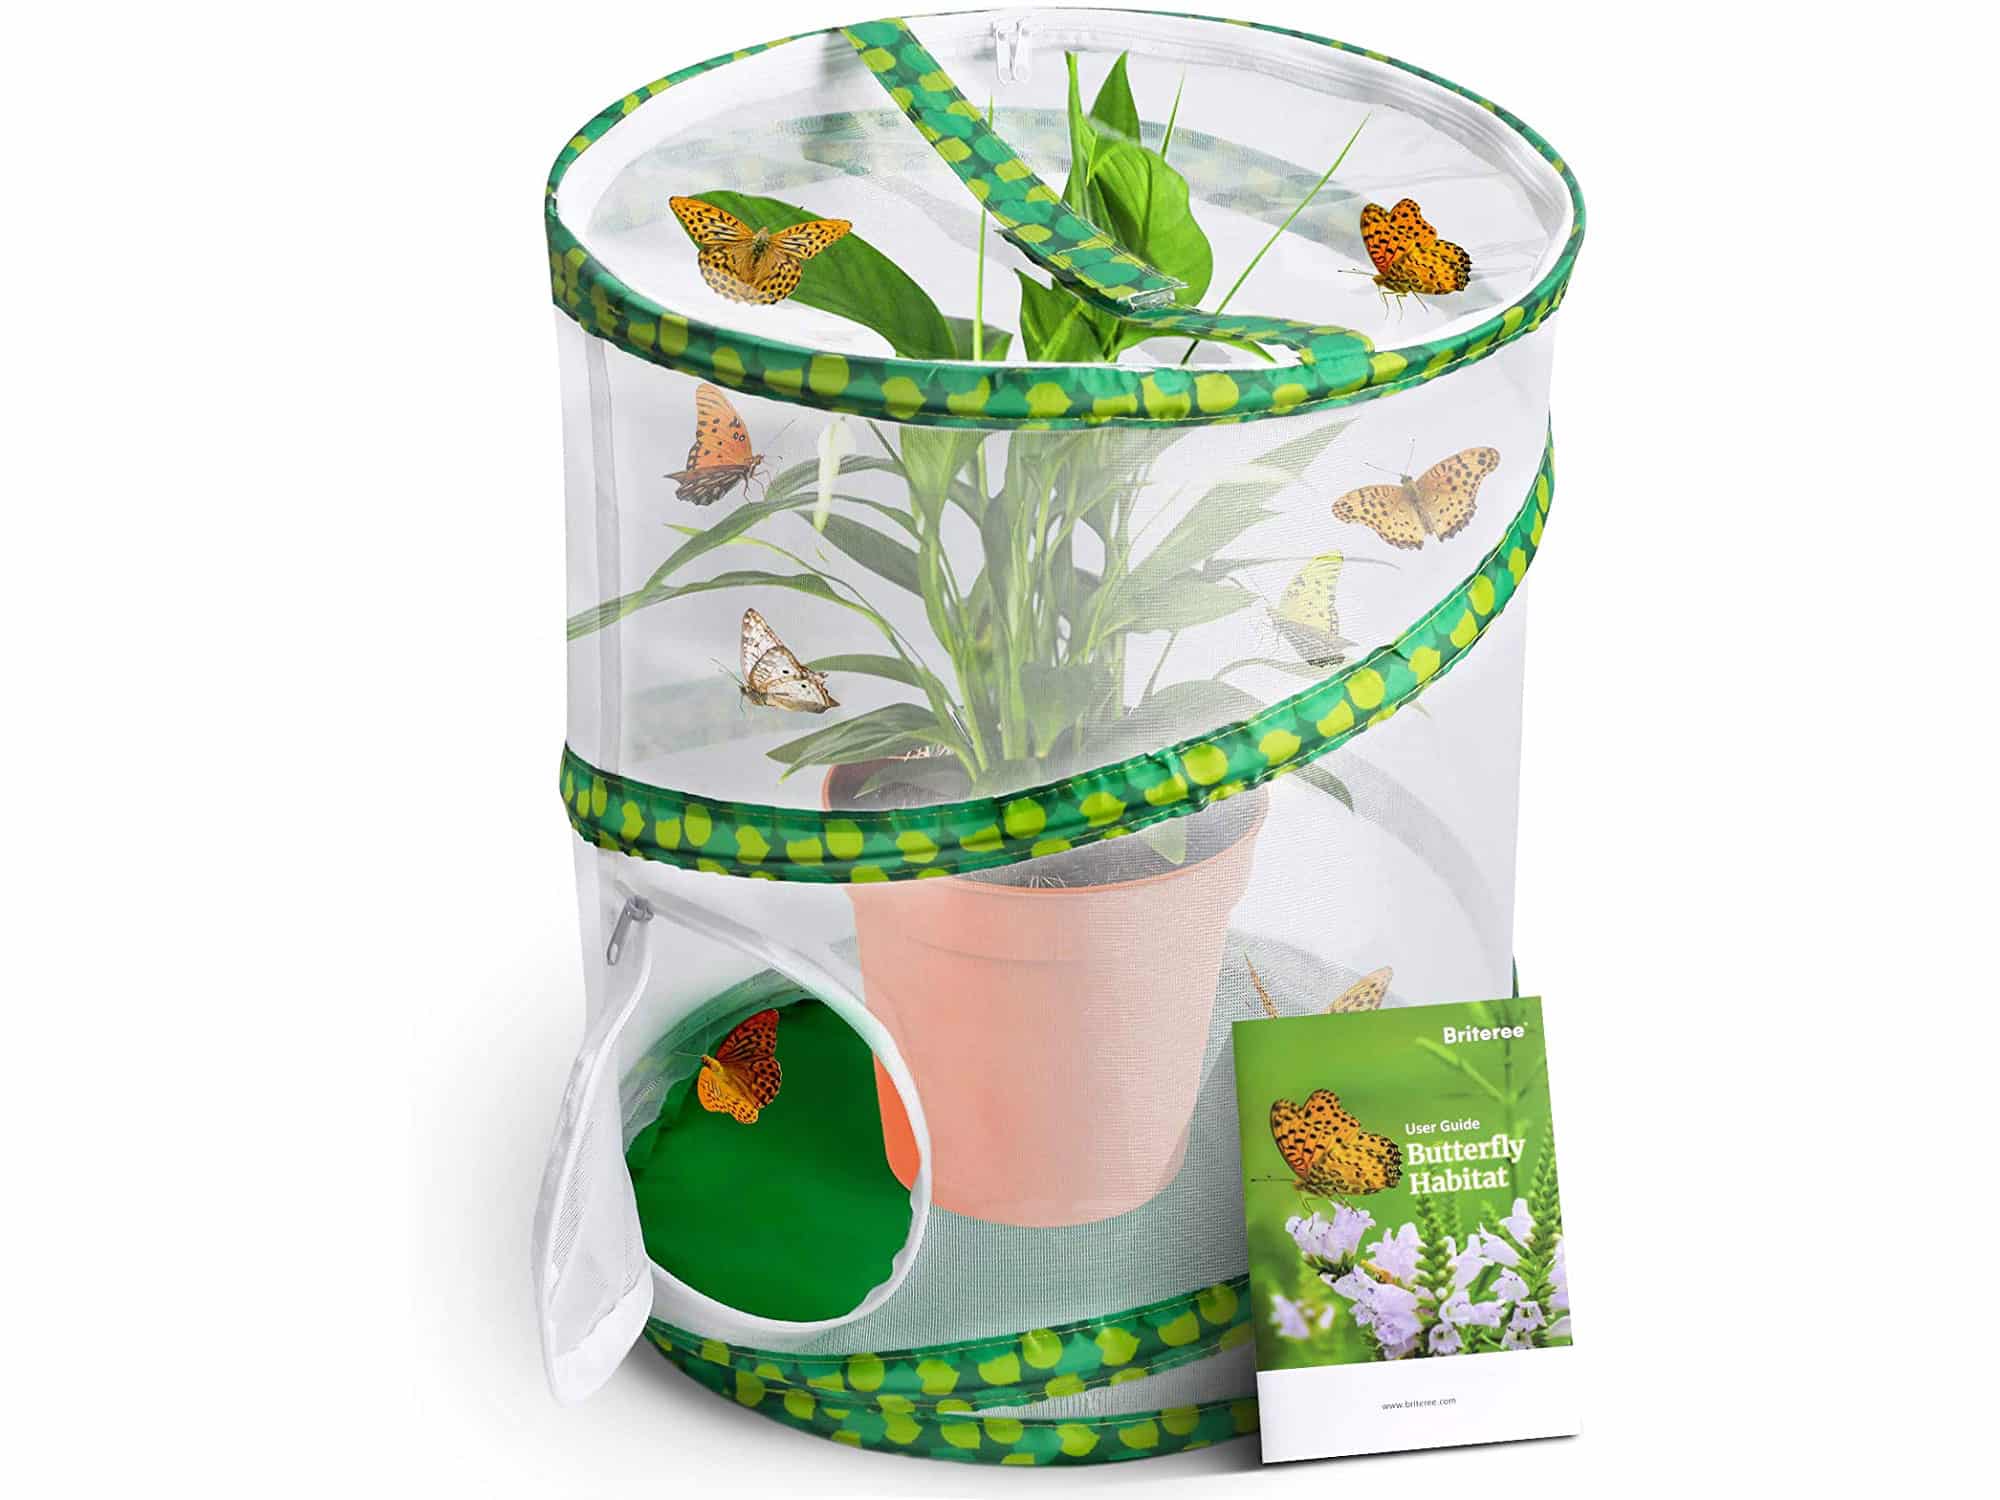 Briteree Butterfly Habitat Cage for Kids, Include Quick Start Guide Manual, Pop Up 12 X 14 Inches, Unrestricted Clear Vision